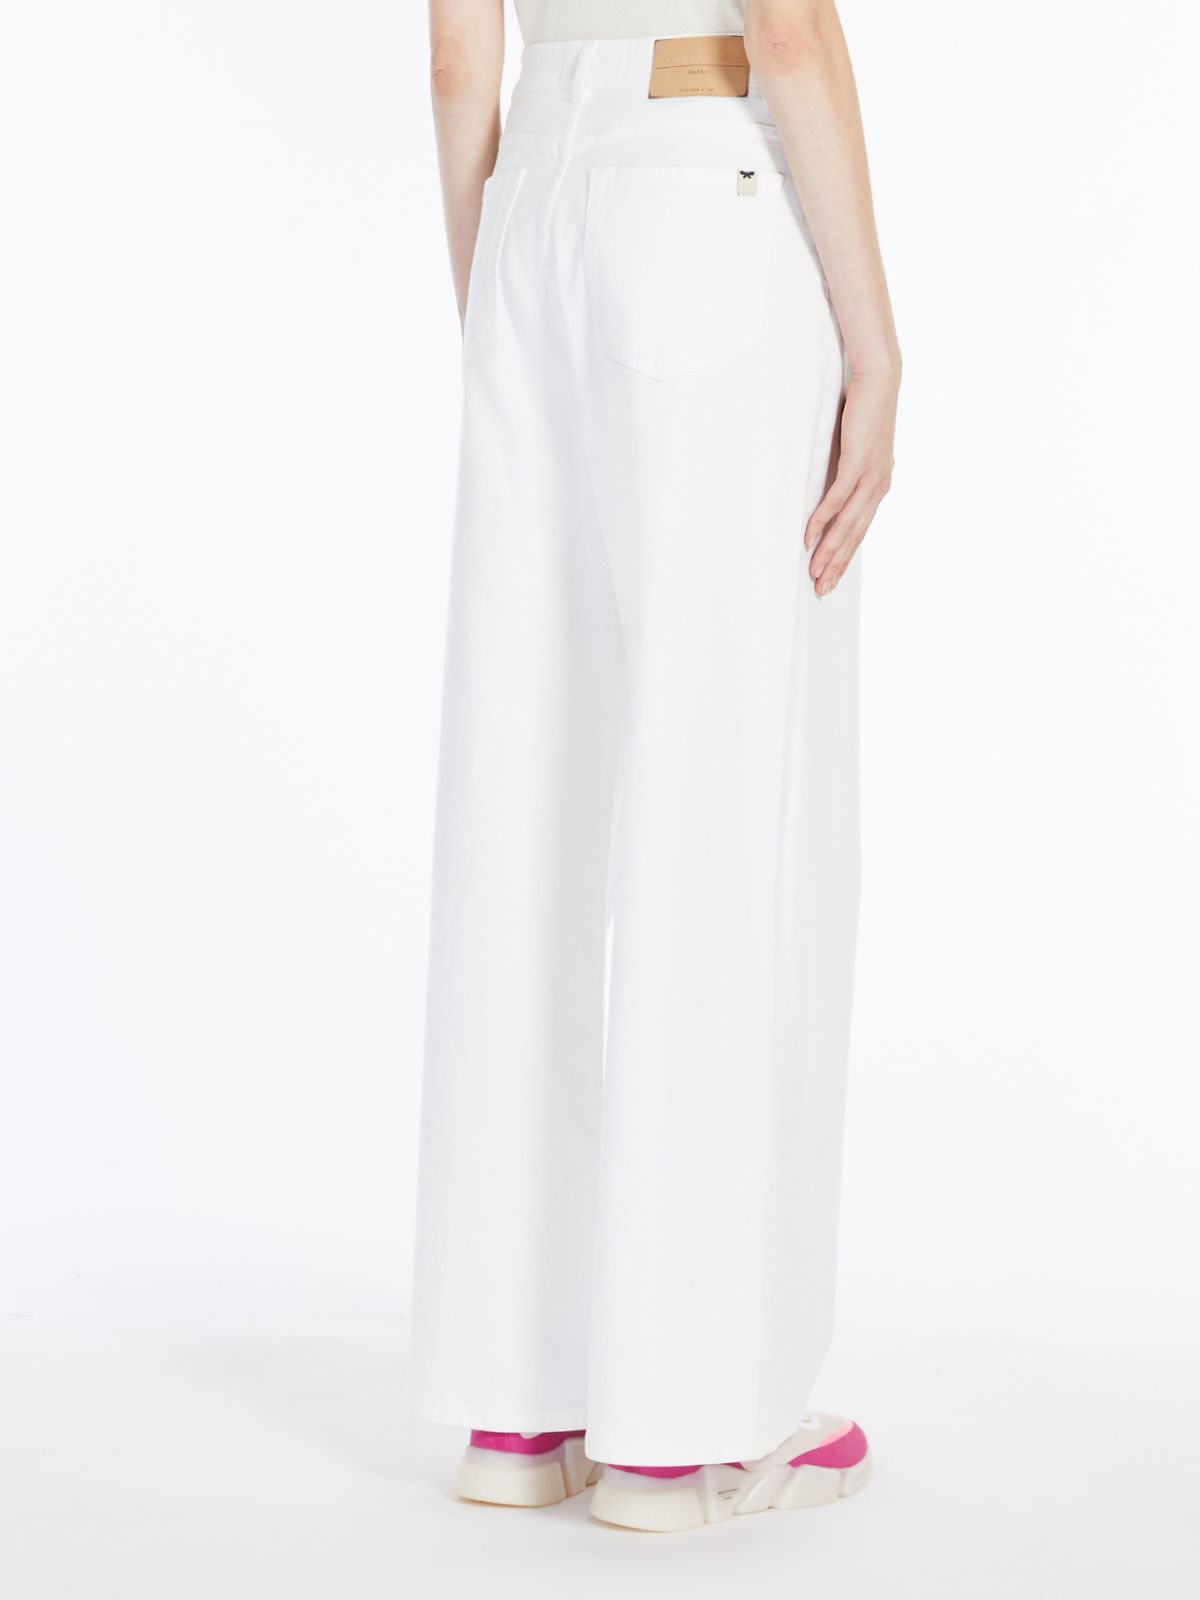 Stretch cotton trousers - WHITE - Weekend Max Mara - 3